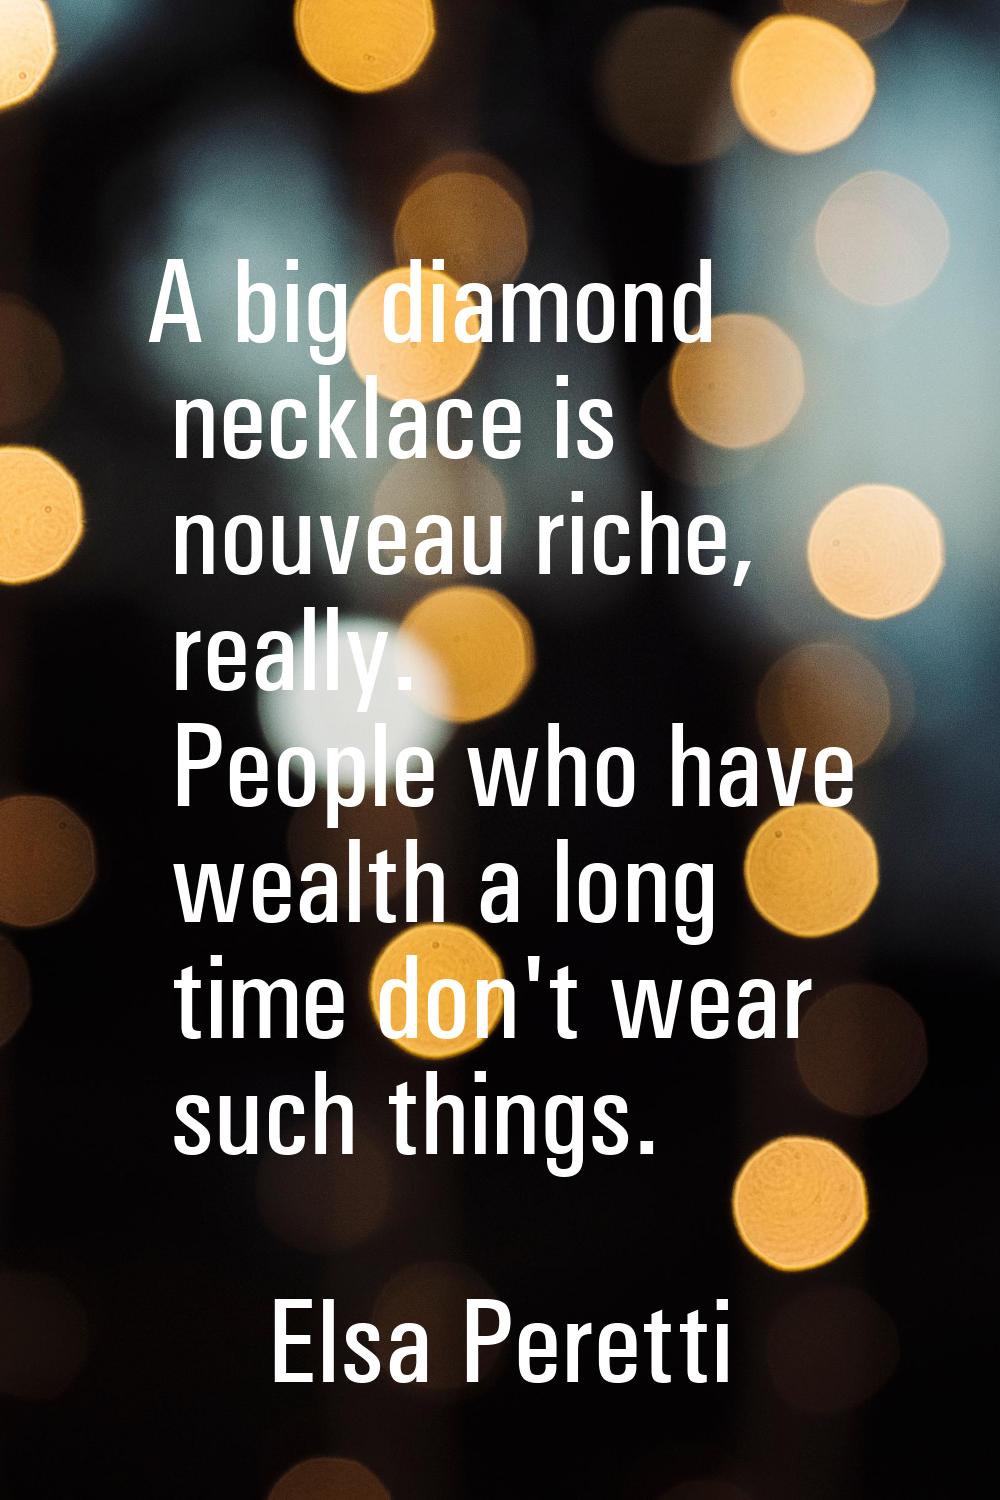 A big diamond necklace is nouveau riche, really. People who have wealth a long time don't wear such